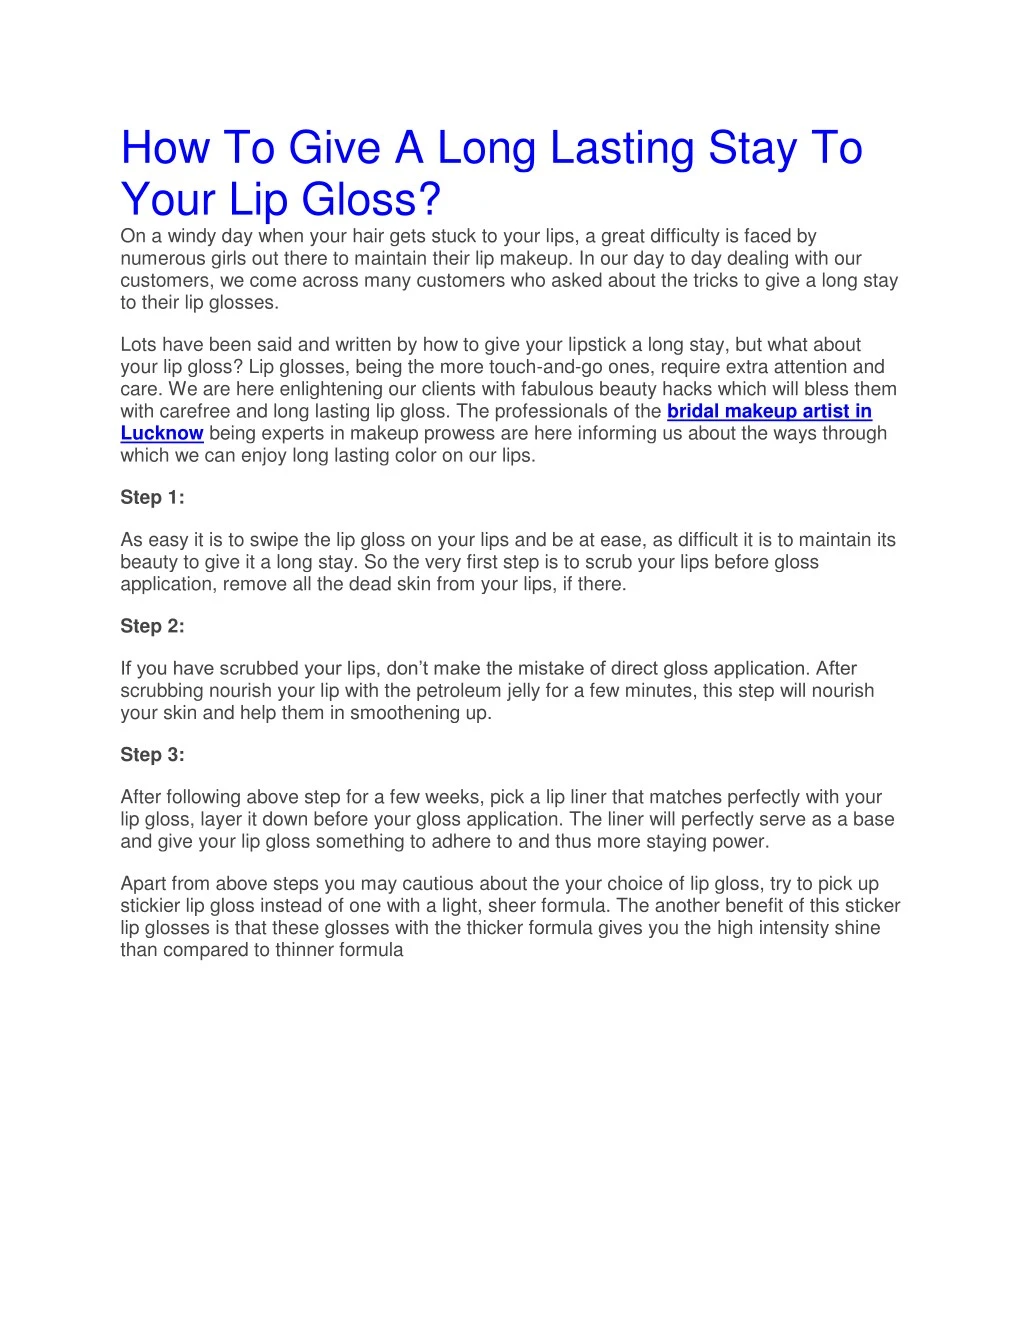 how to give a long lasting stay to your lip gloss n.